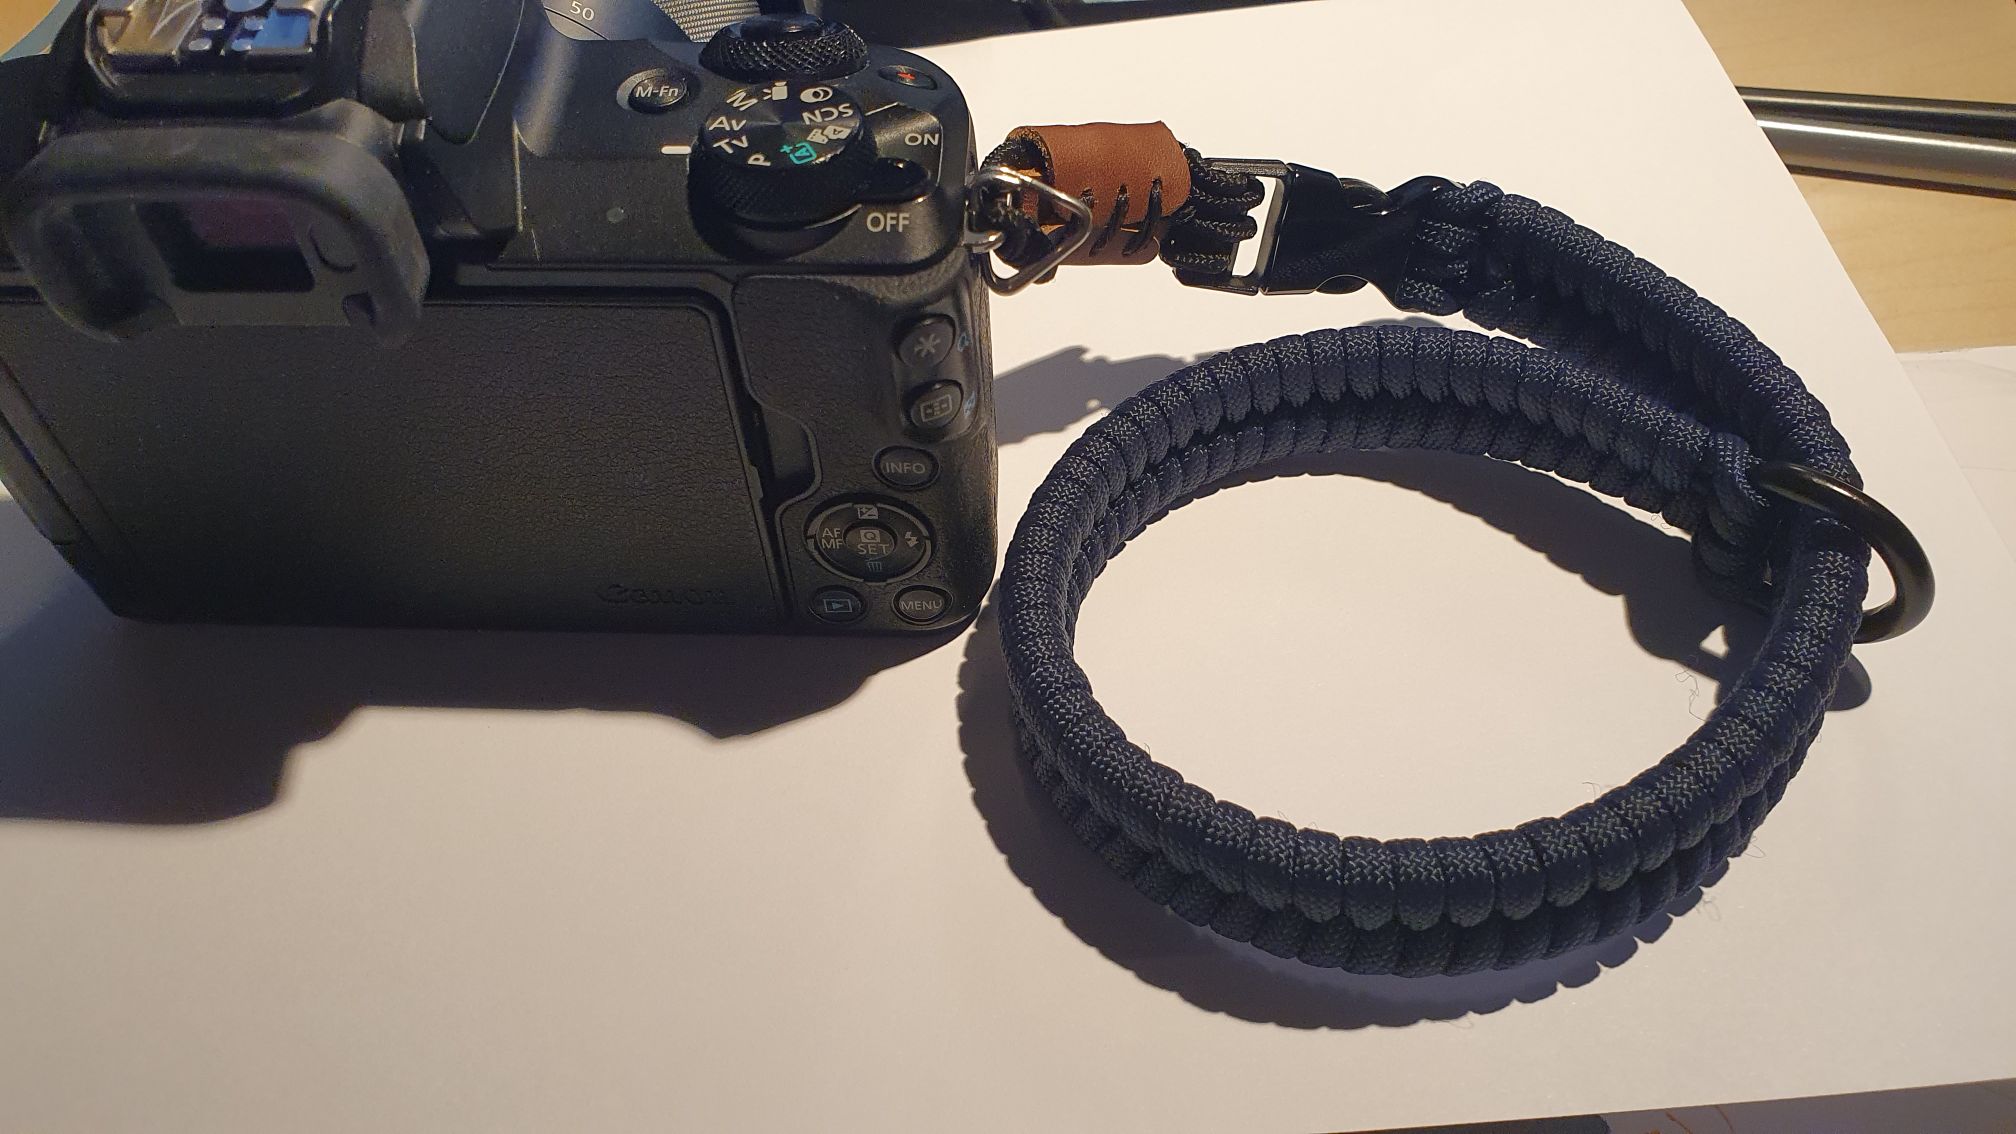 Camera with an attached wrist strap